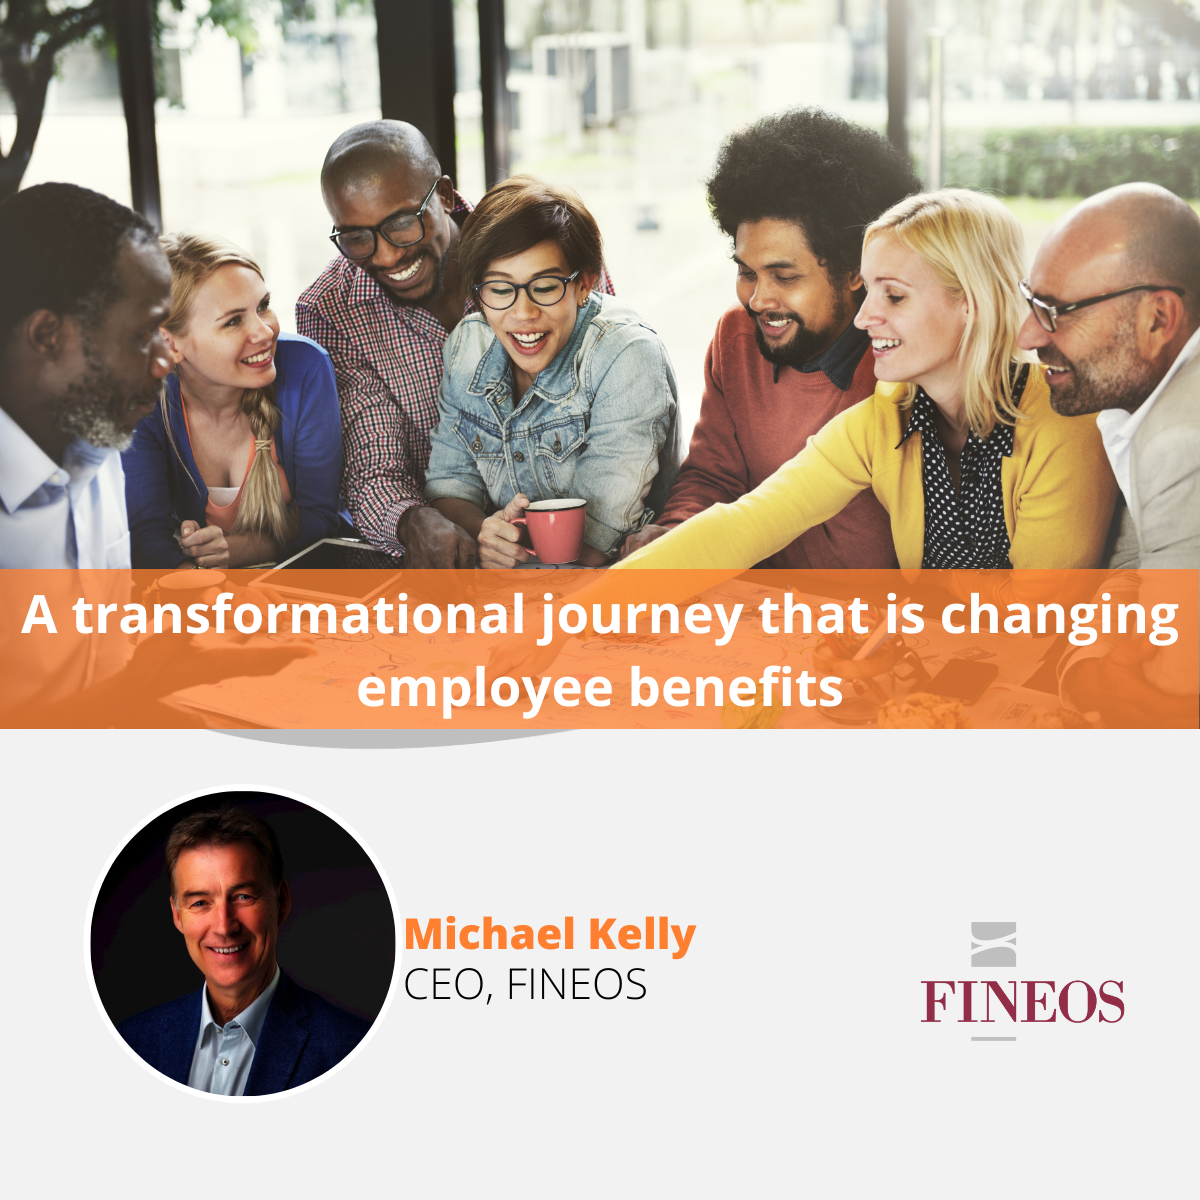 A transformational journey that is changing employee benefits